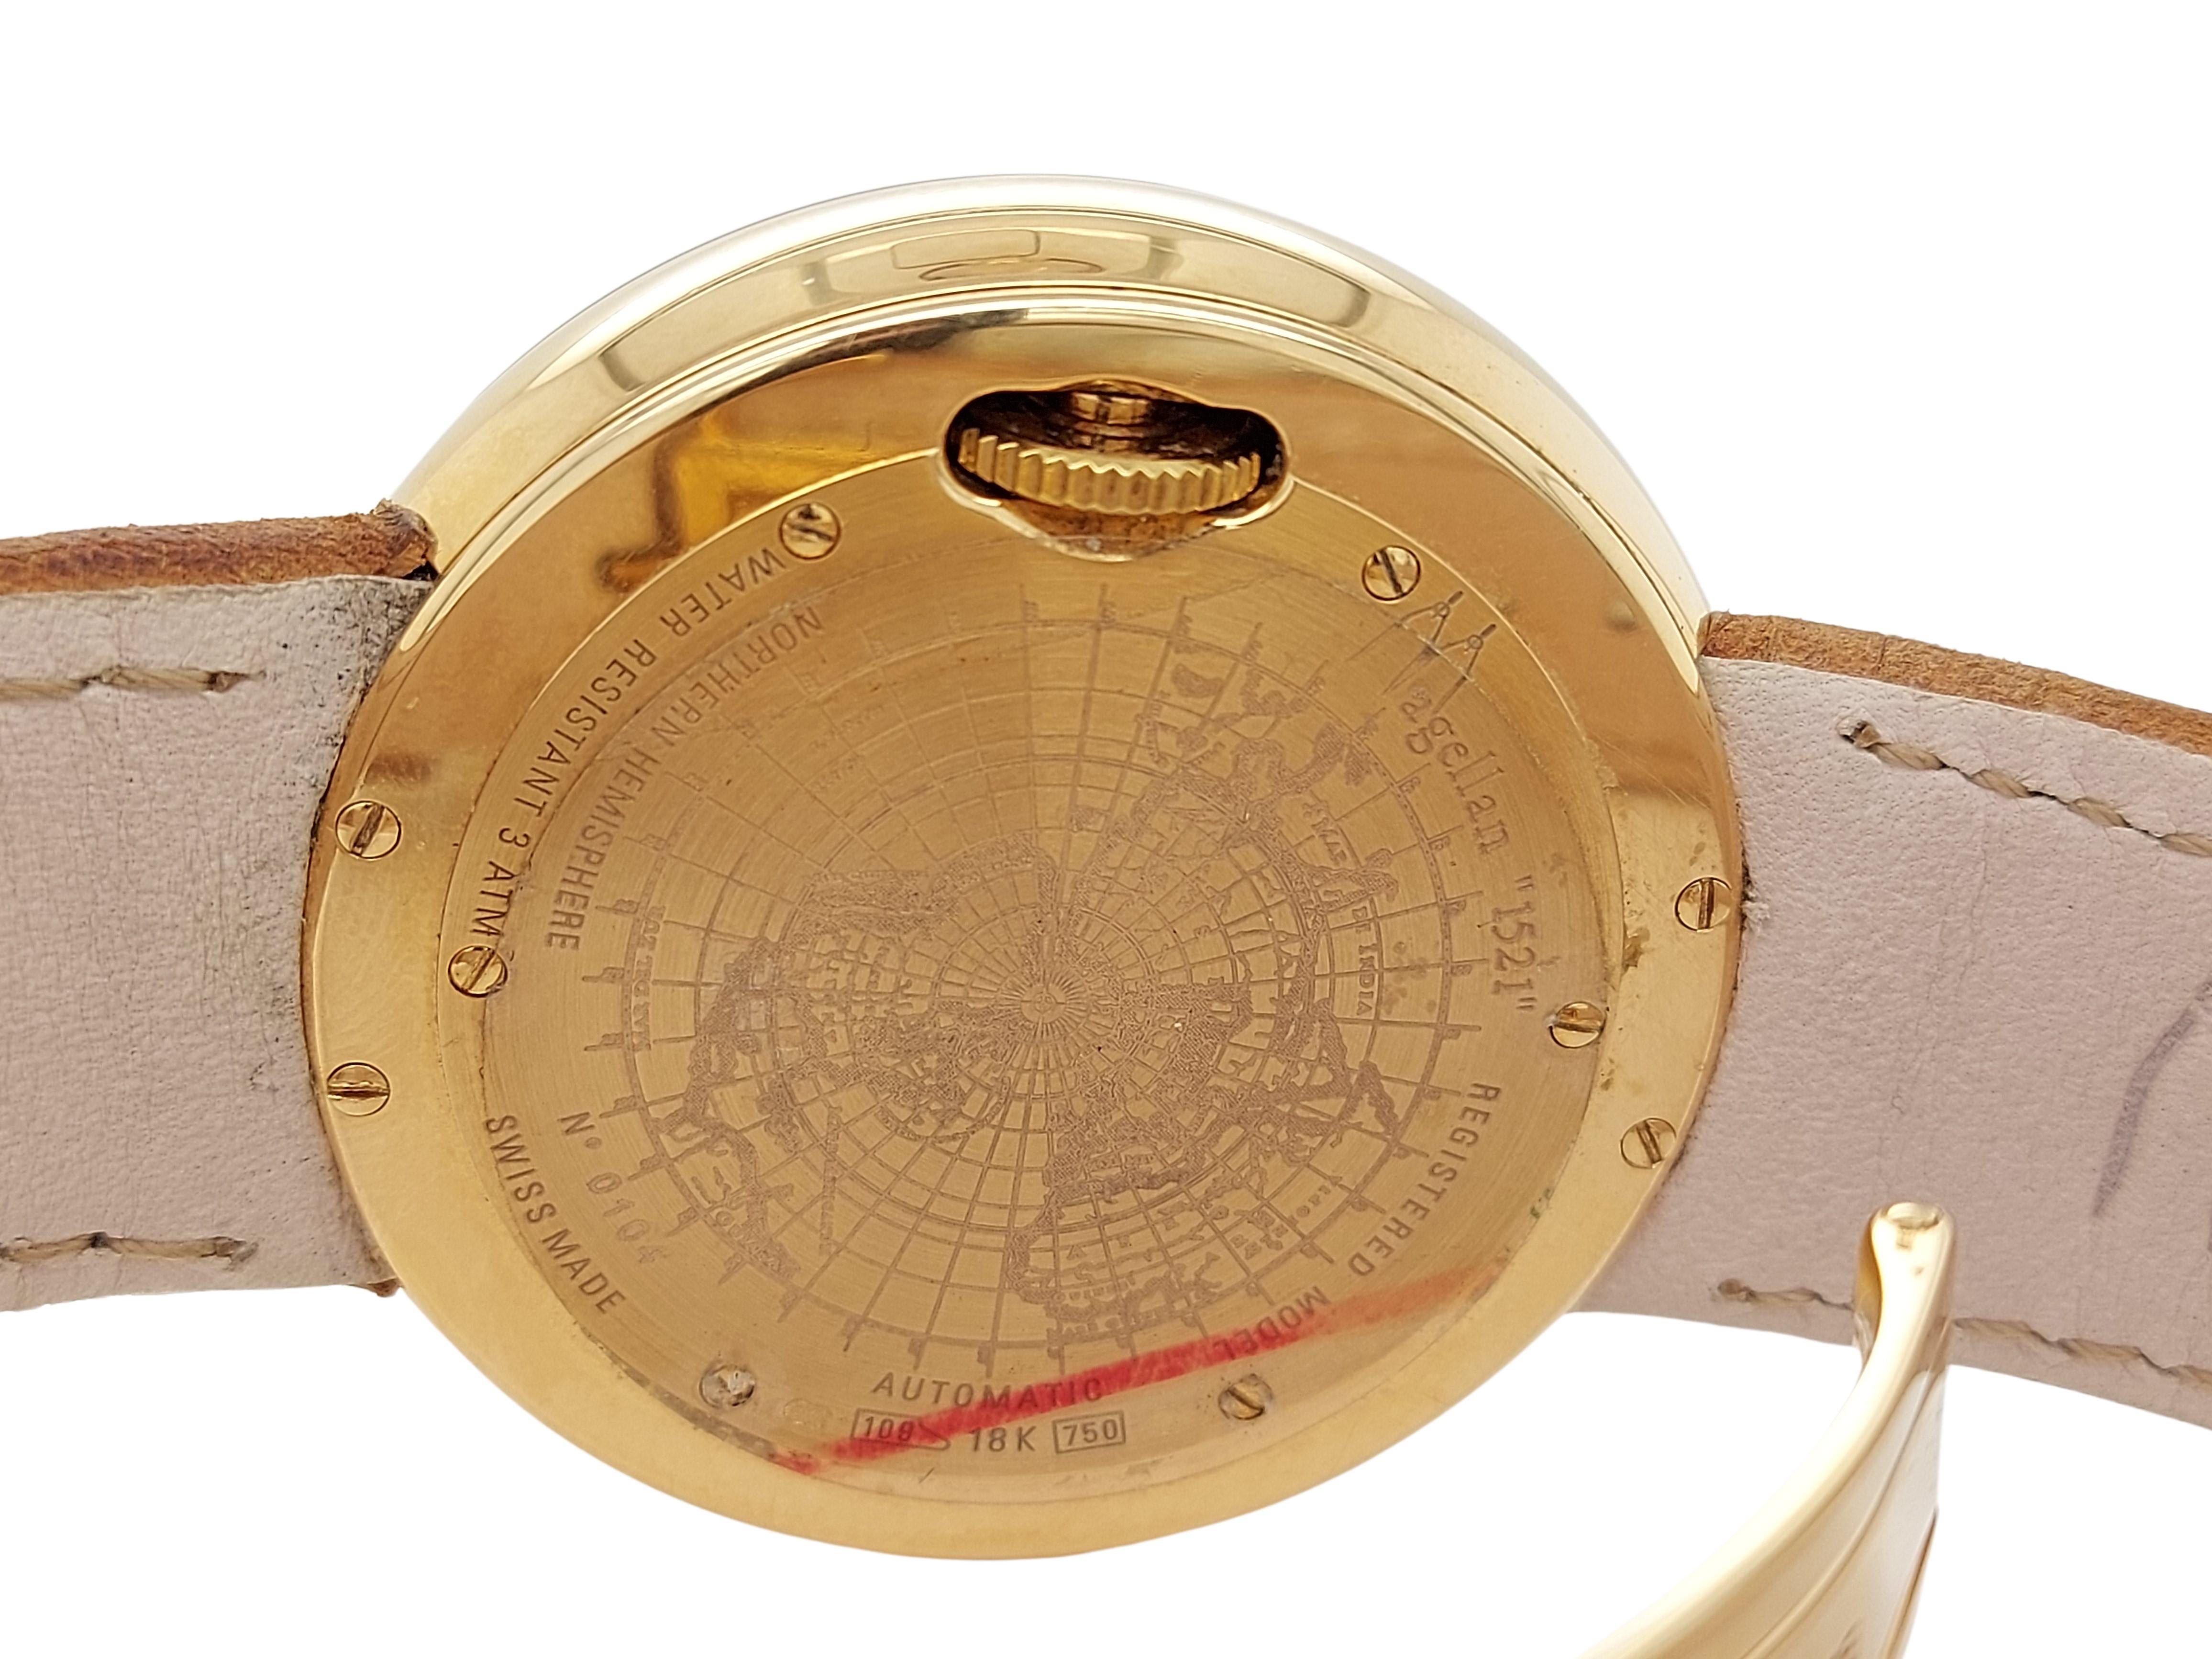 Magellan 1521 World Time Gold Watch Depicting Northern 3D Hemisphere, Automatic For Sale 3